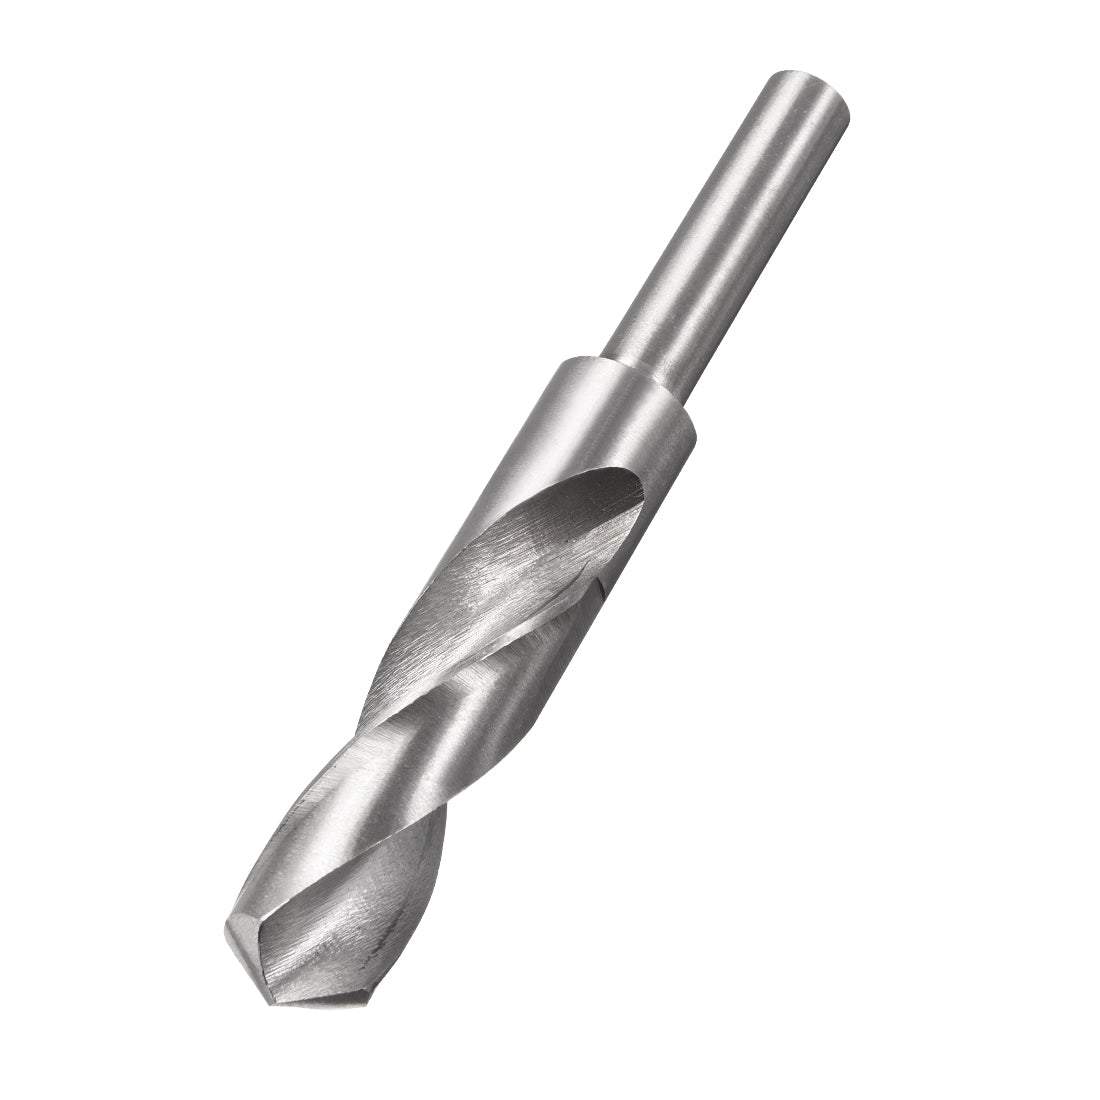 uxcell Uxcell 21mm Reduced Shank Drill Bit High Speed Steel 4241 with 1/2" Straight Shank